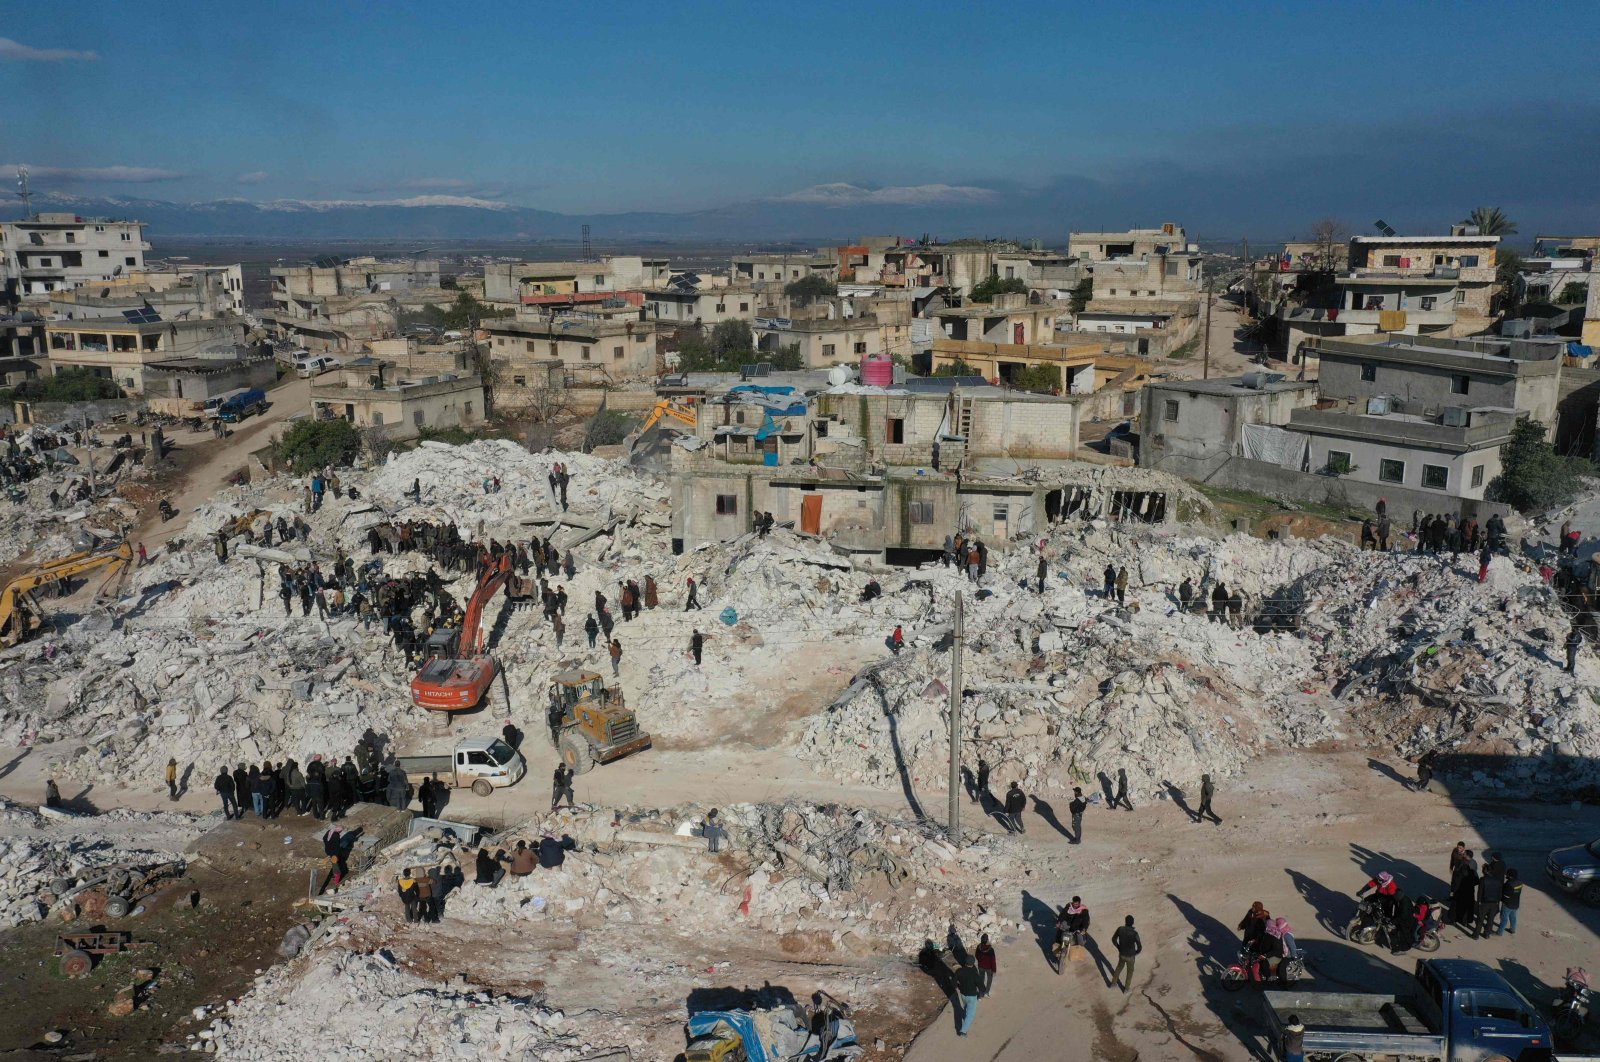 This aerial view shows rescuers searching for survivors amidst the rubble of a collapsed building in the town of Harim in Syria&#039;s opposition-held northwestern Idlib province on the border with Türkiye, on Feb. 8, 2023. (AFP Photo)